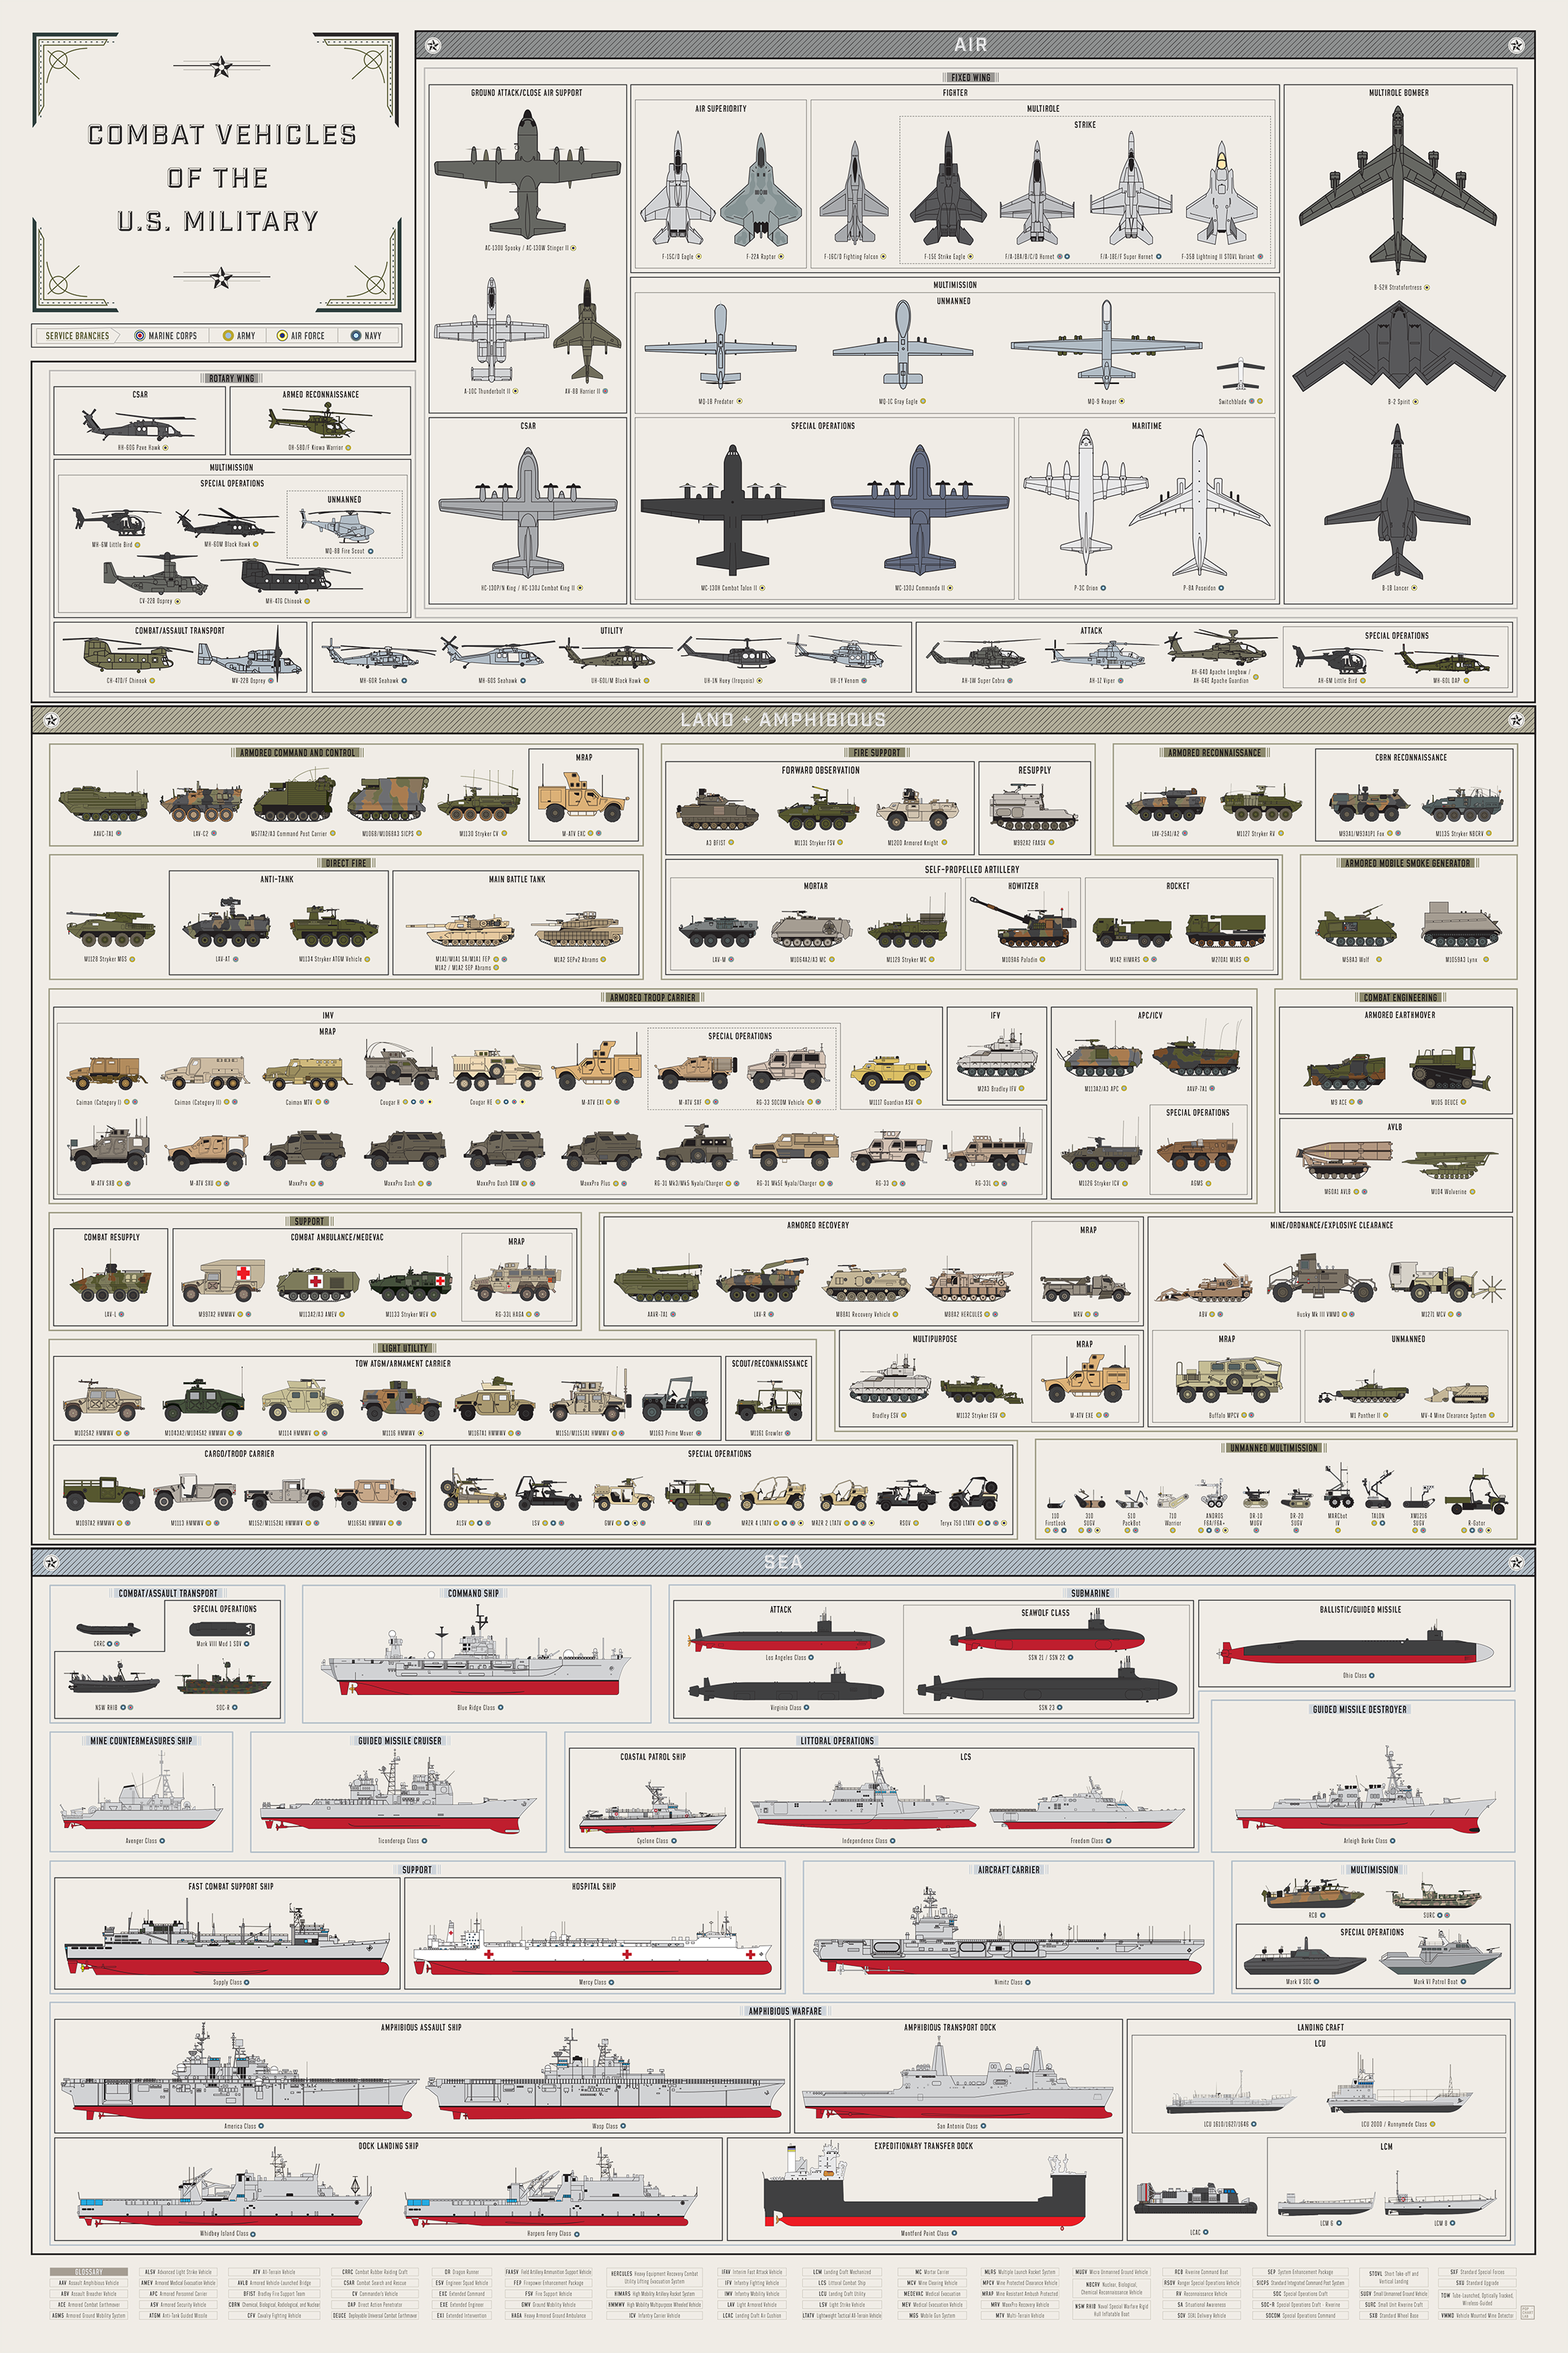 All the Combat Vehicles of the U.S. Military in One Giant Poster